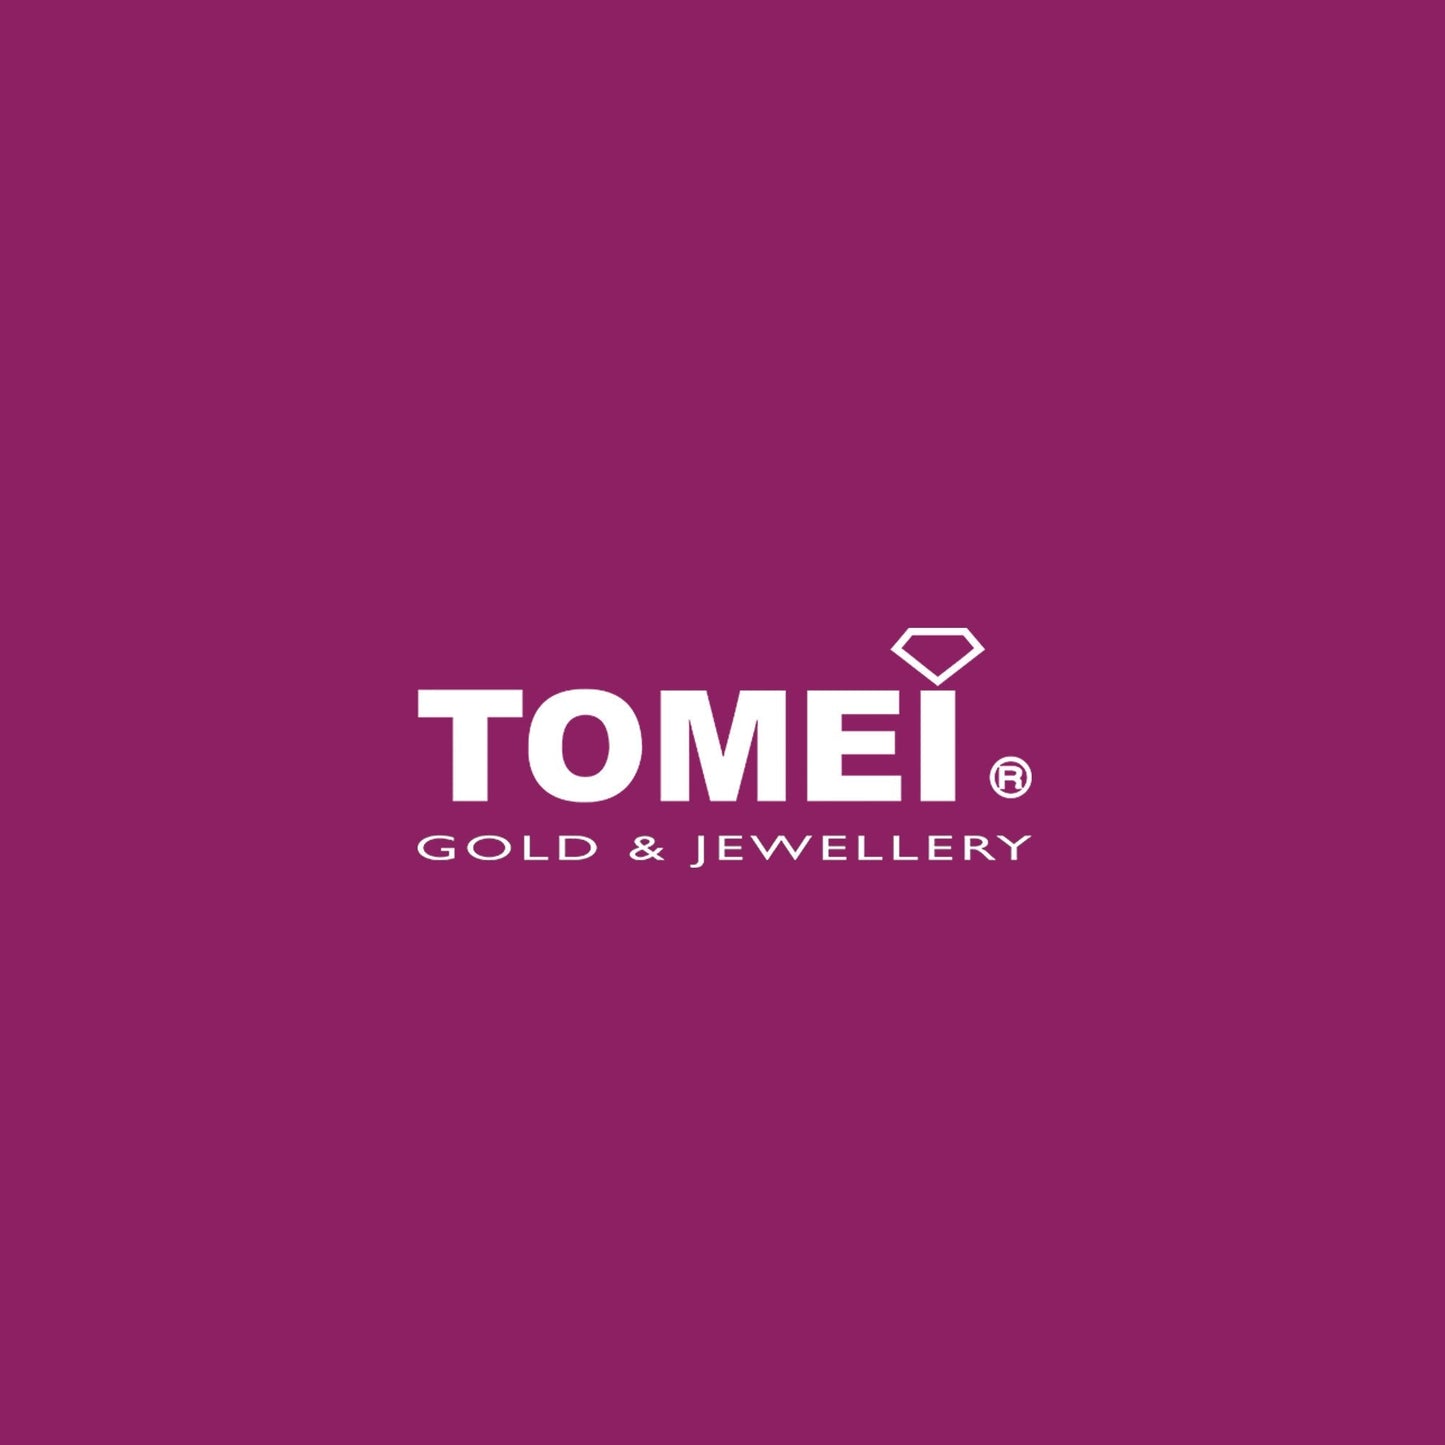 TOMEI Baby Bracelet, Yellow Gold 916